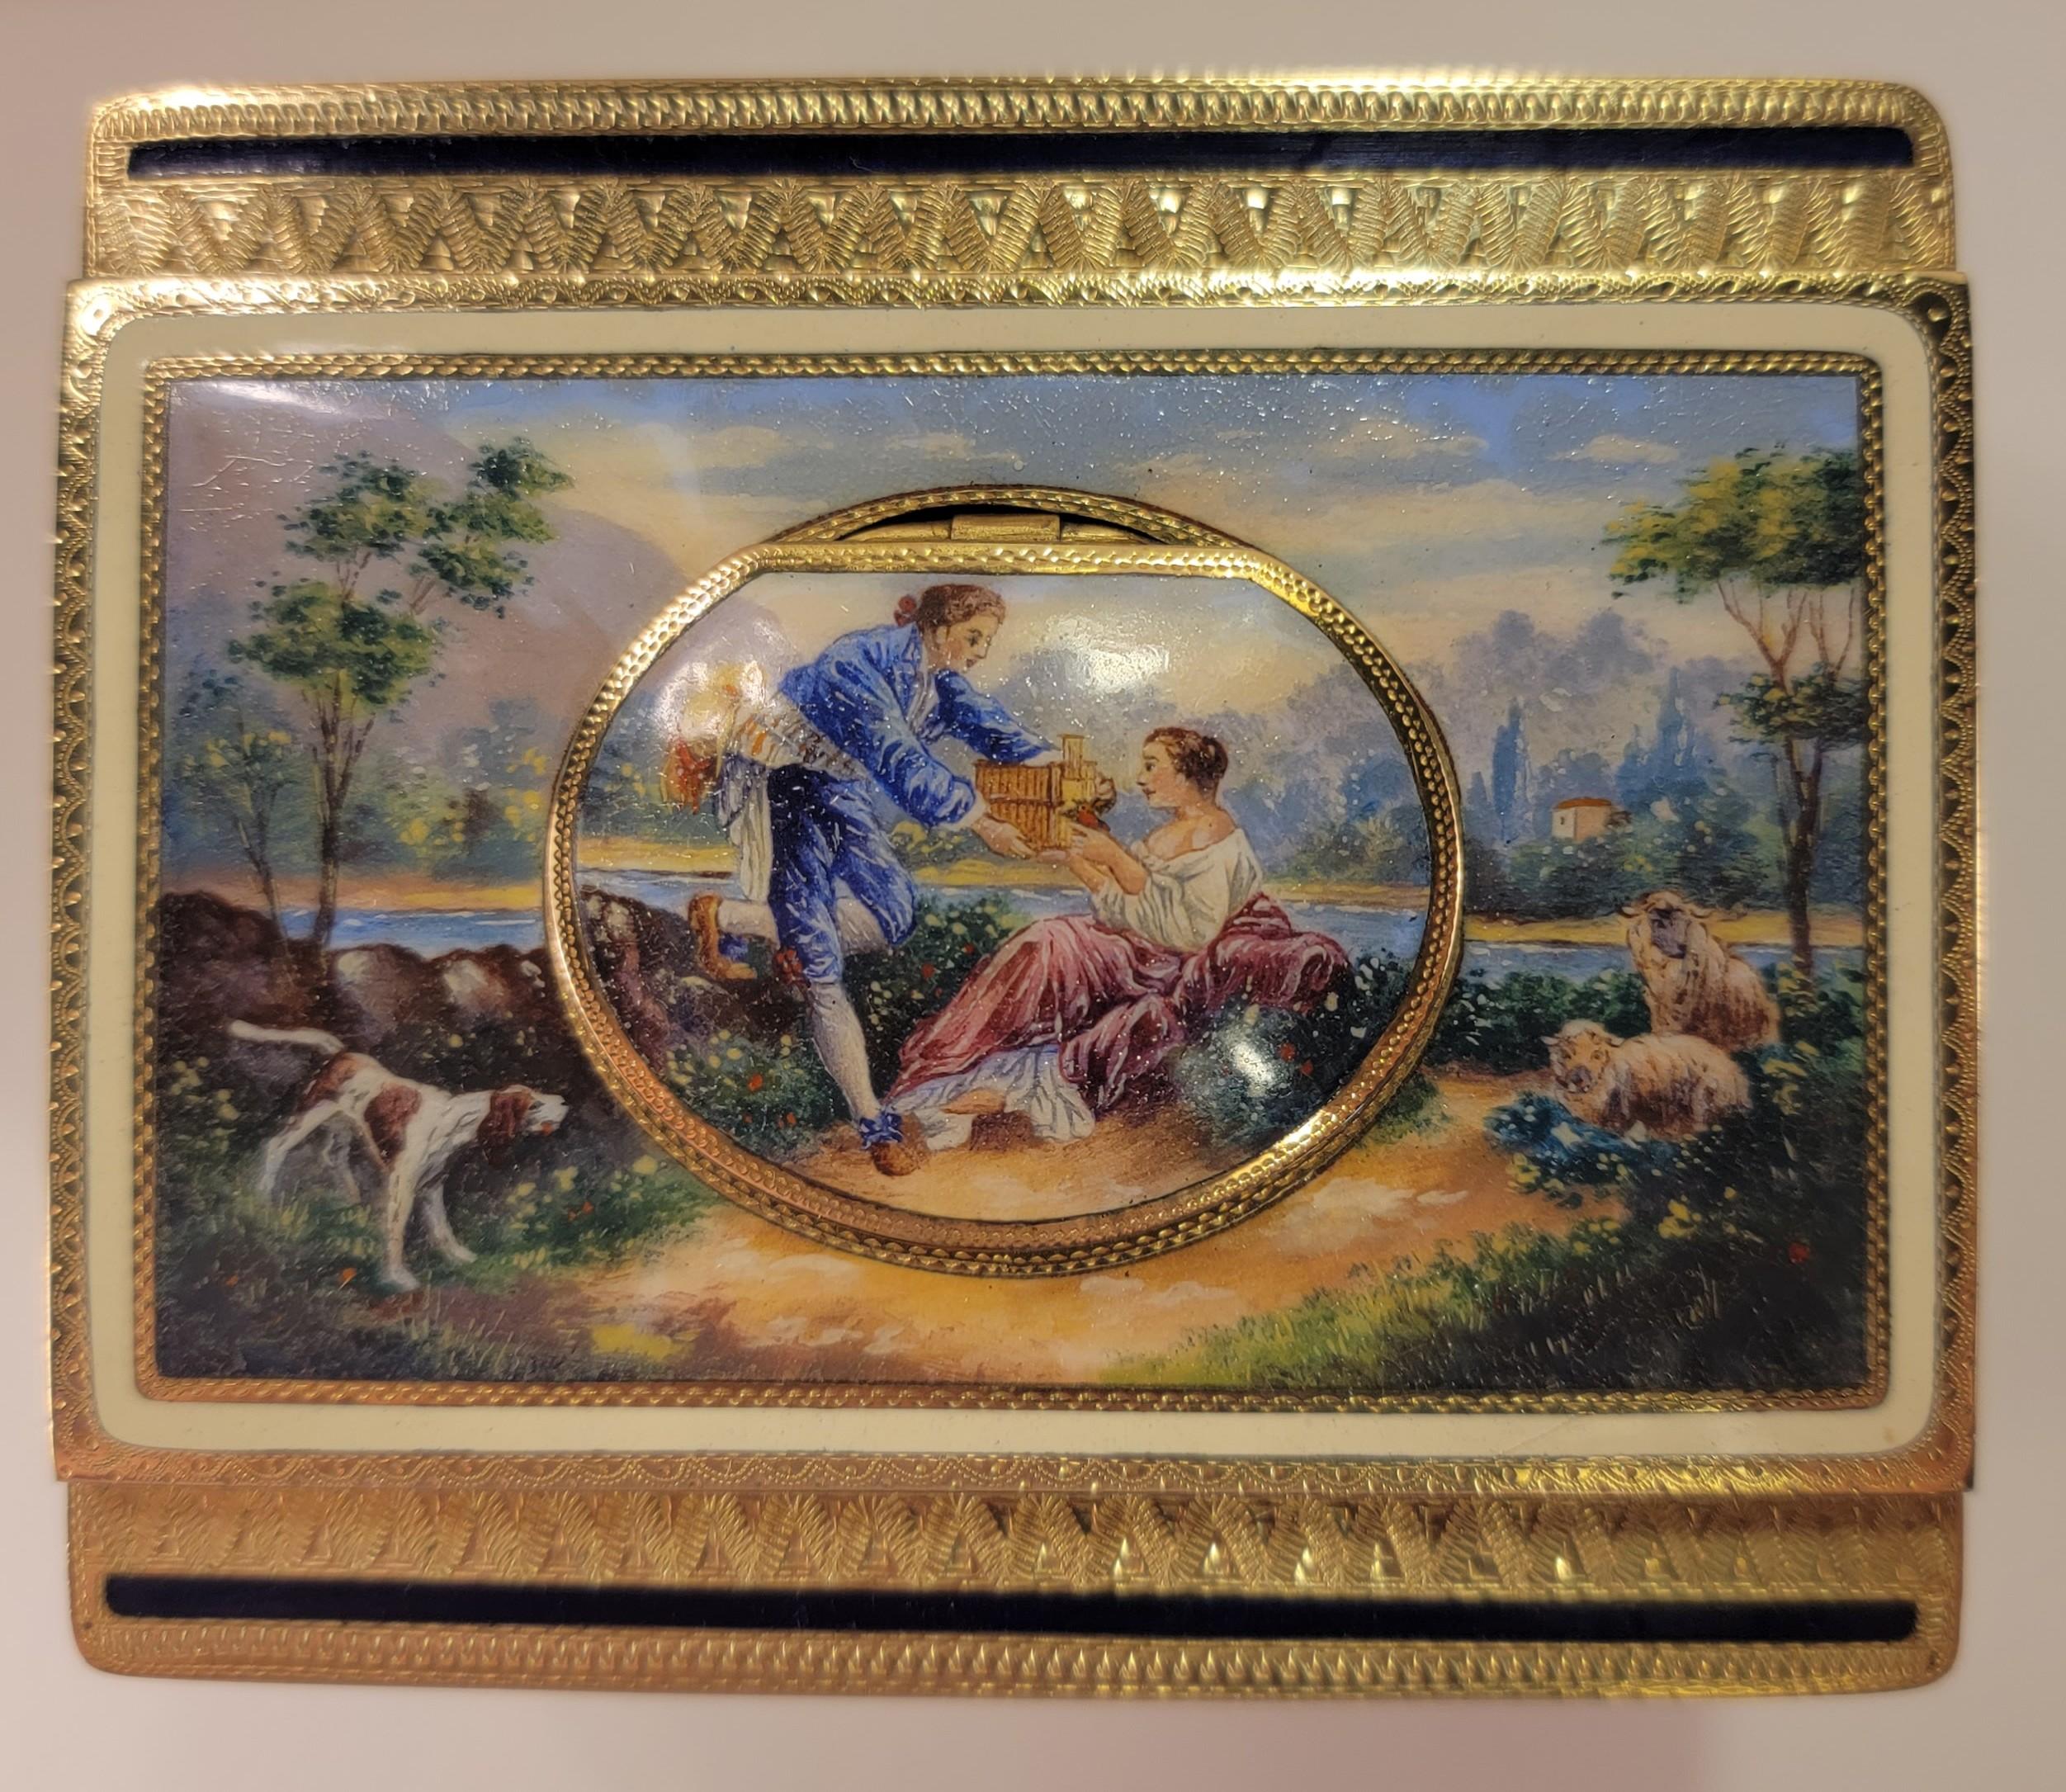 Karl Griesbaum Animated Singing Bird Box & Timepiece. An exceptional gilt brass case with blue and white enamel panels, the sides and back have hand painted round scenic panels; the top of the case has an enameled landscape scene with a couple on